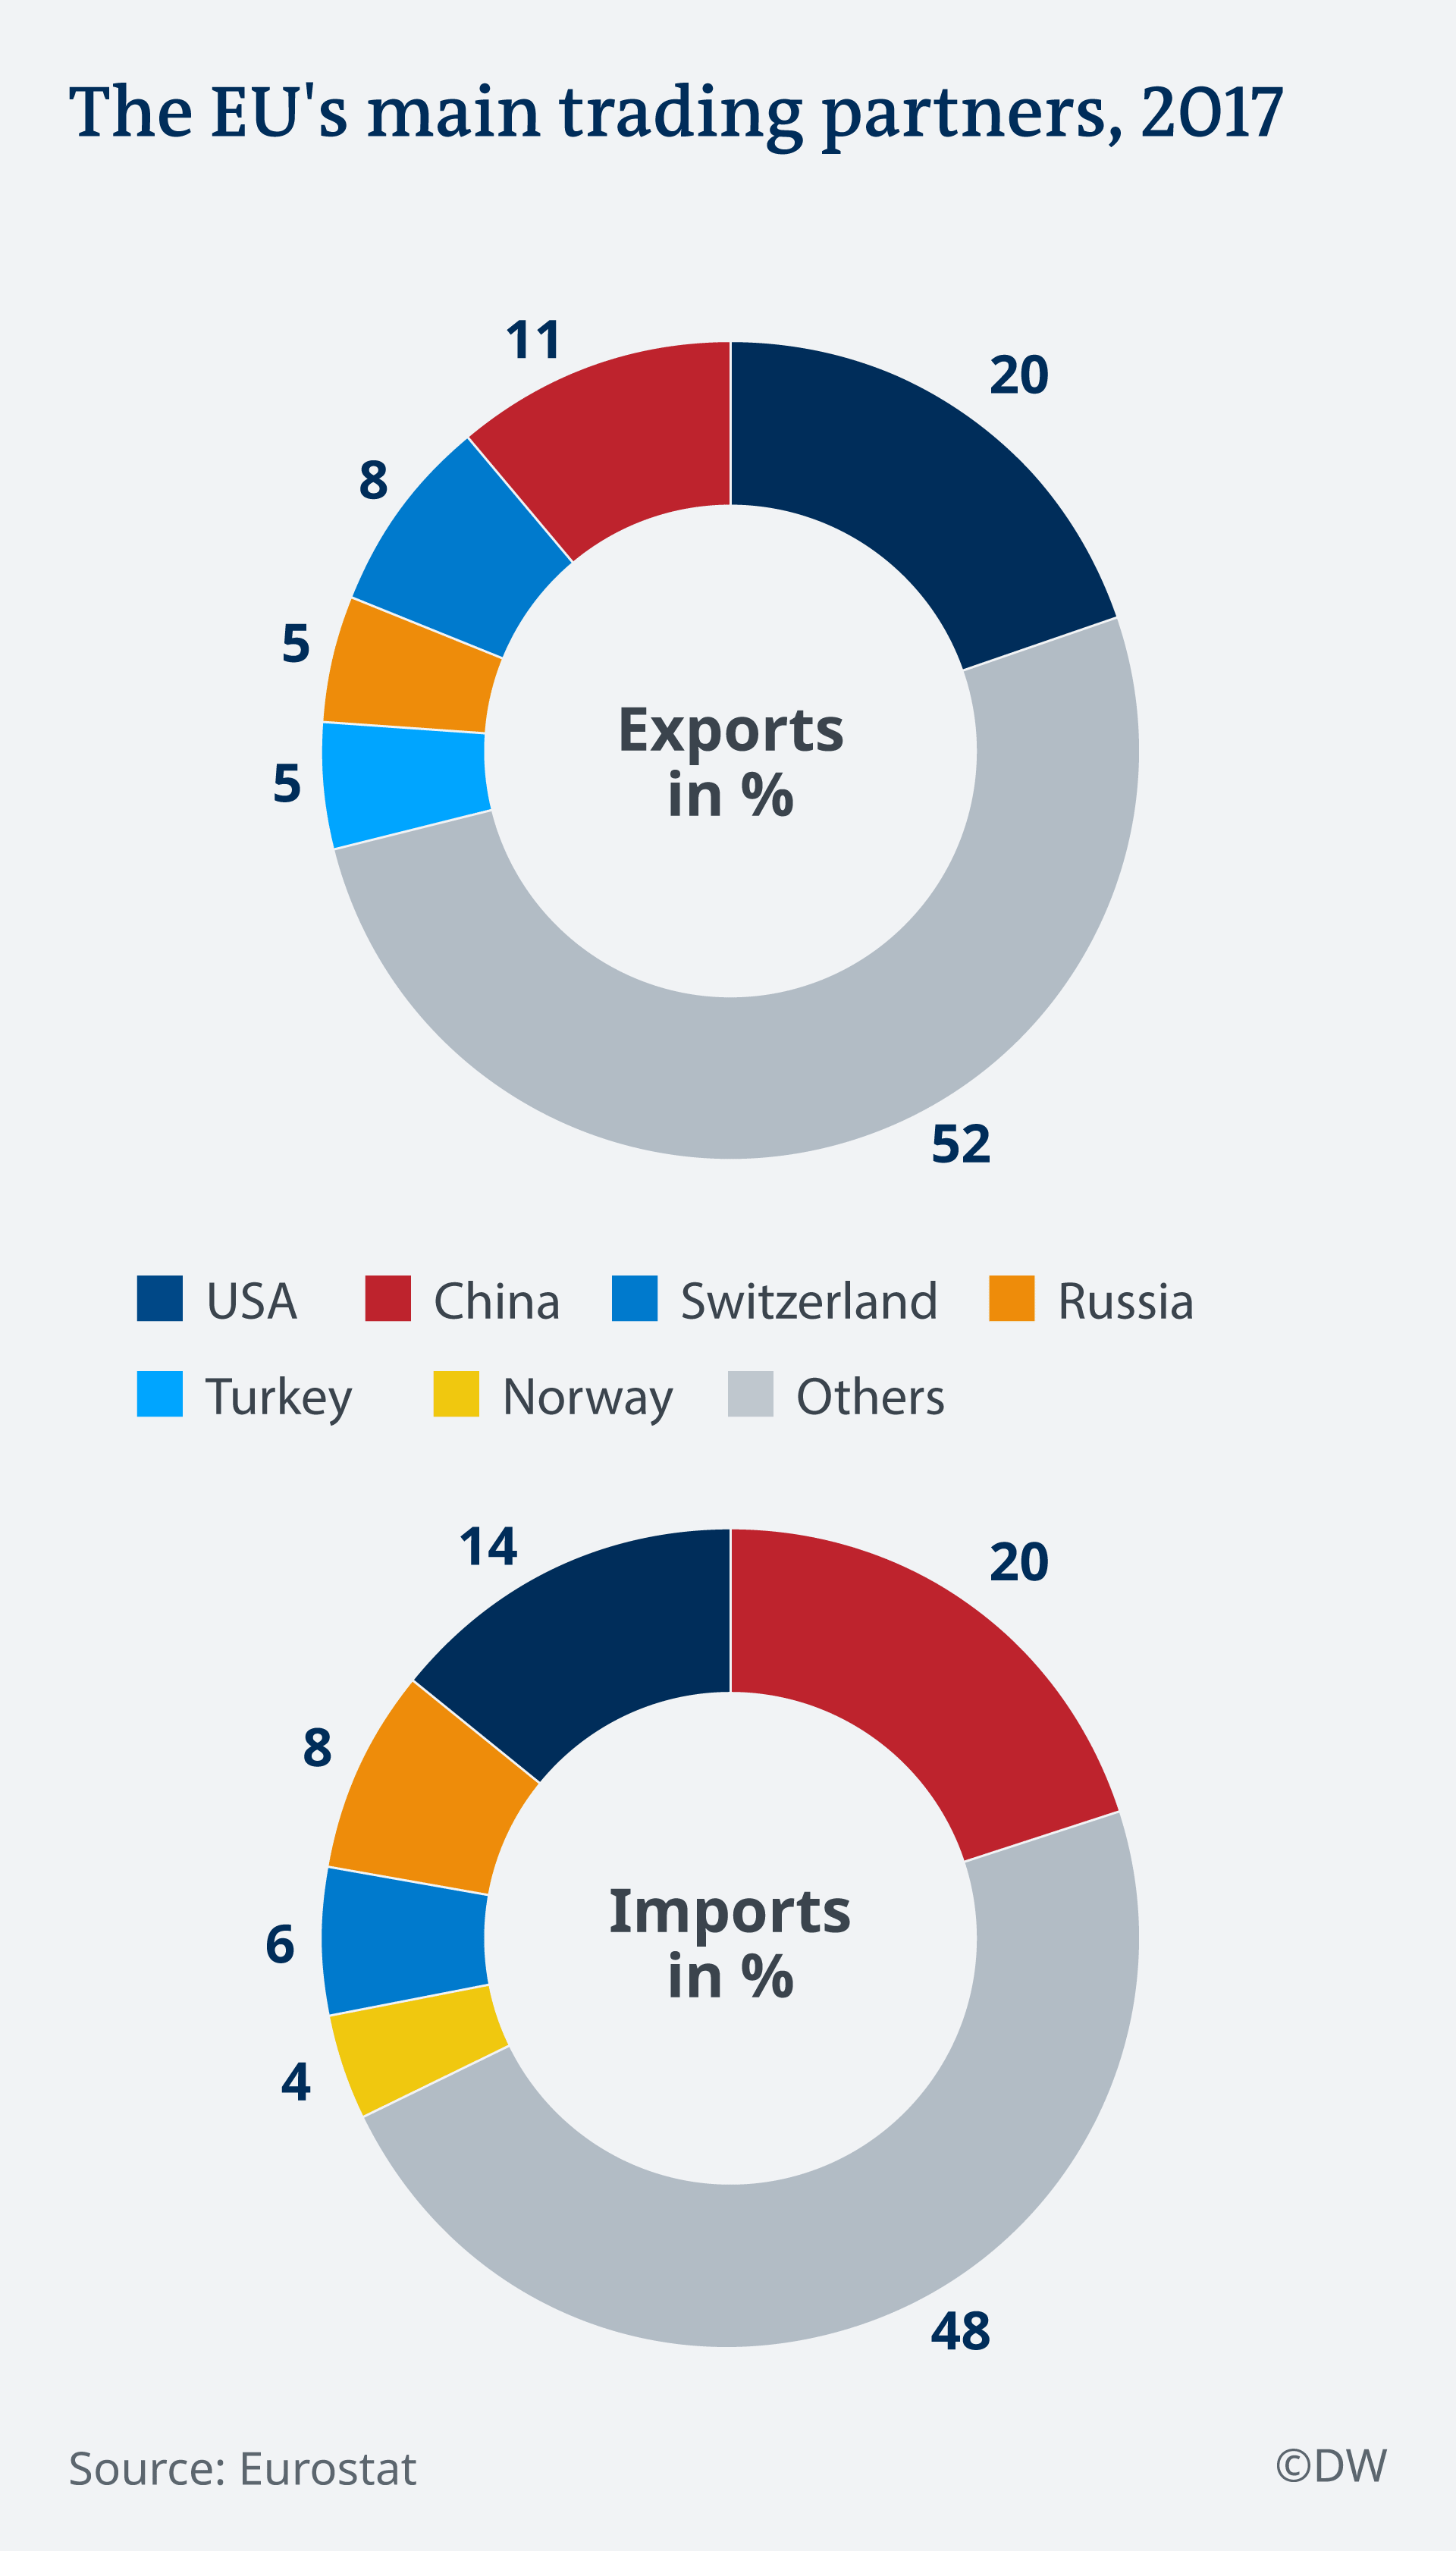 The EU's main trading partners, 2017 - Infographic